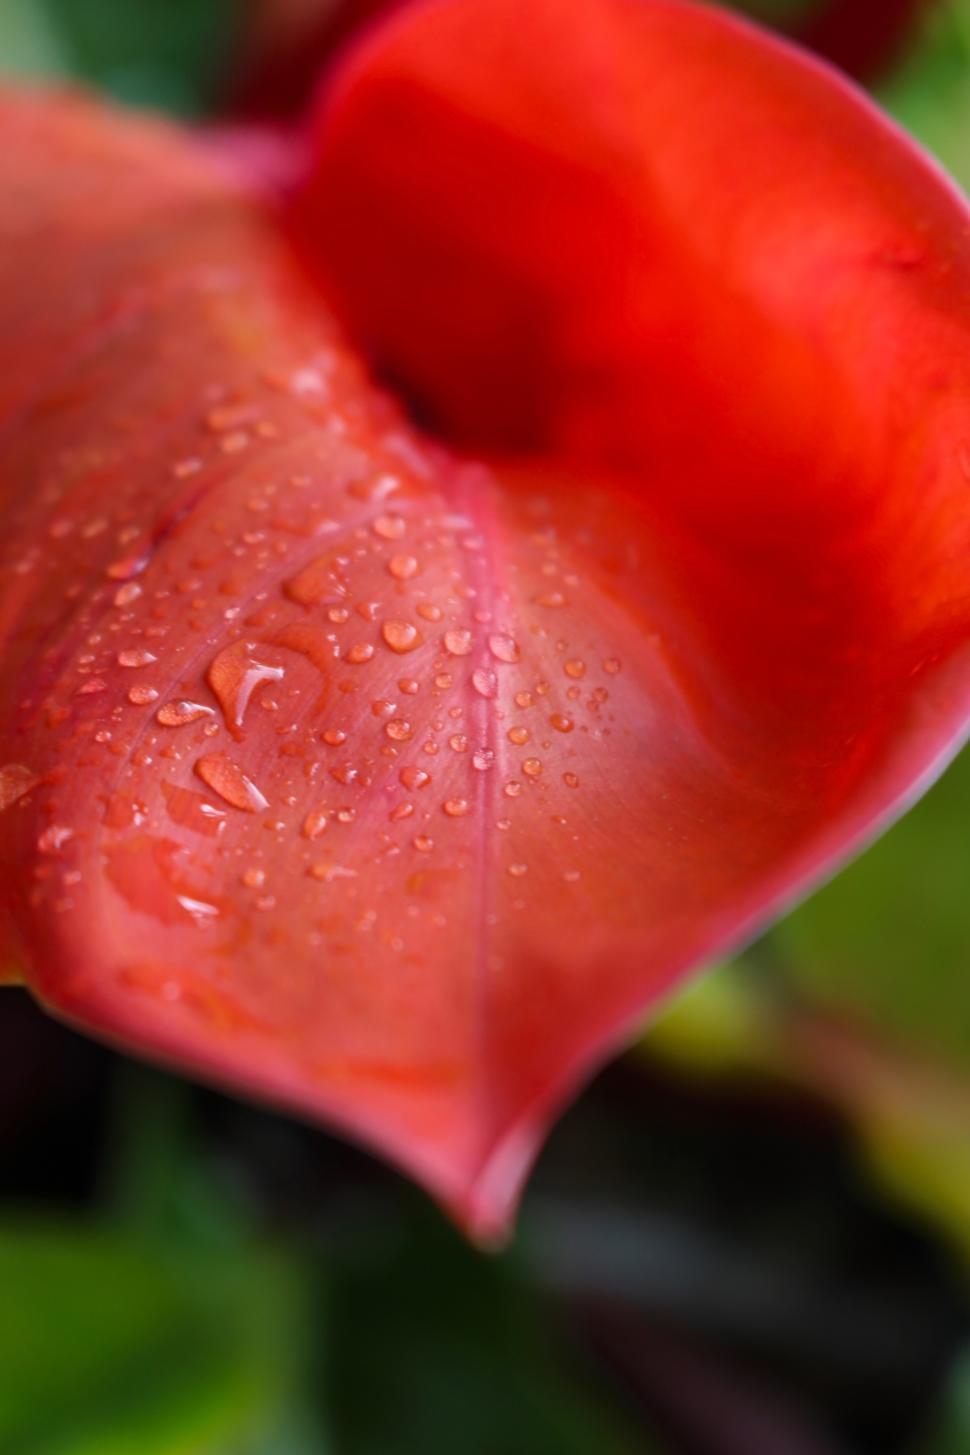 Free Image of Water Droplets on a Red Plant Leaf  